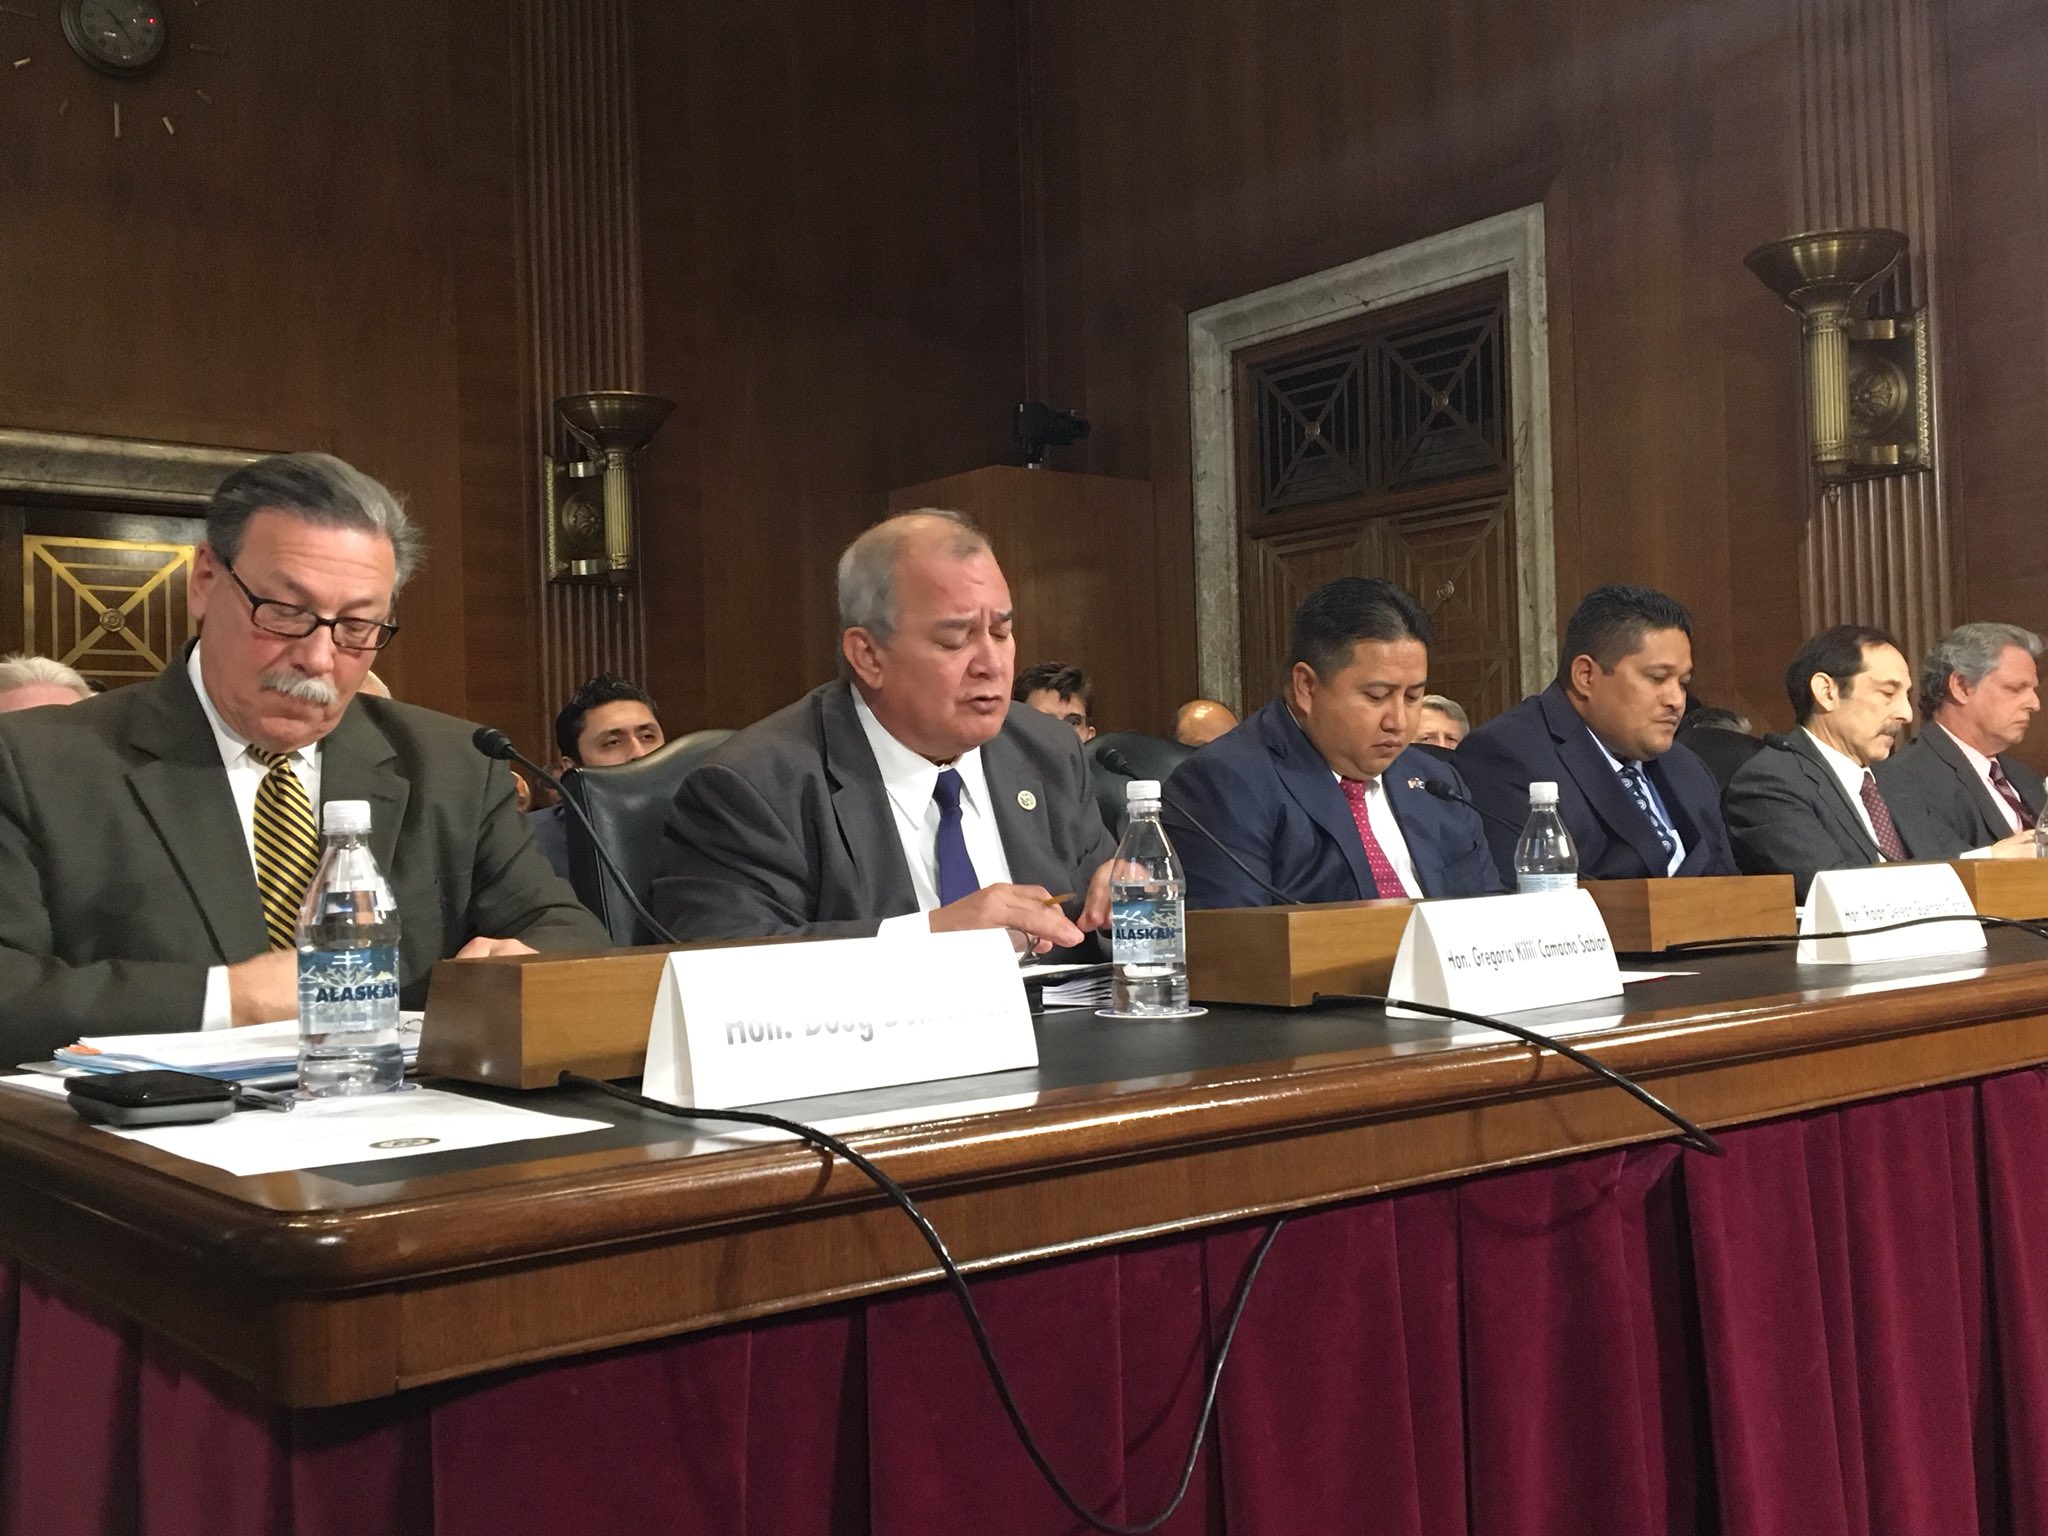 Northern Mariana Islands look to Congress to increase domestic workforce